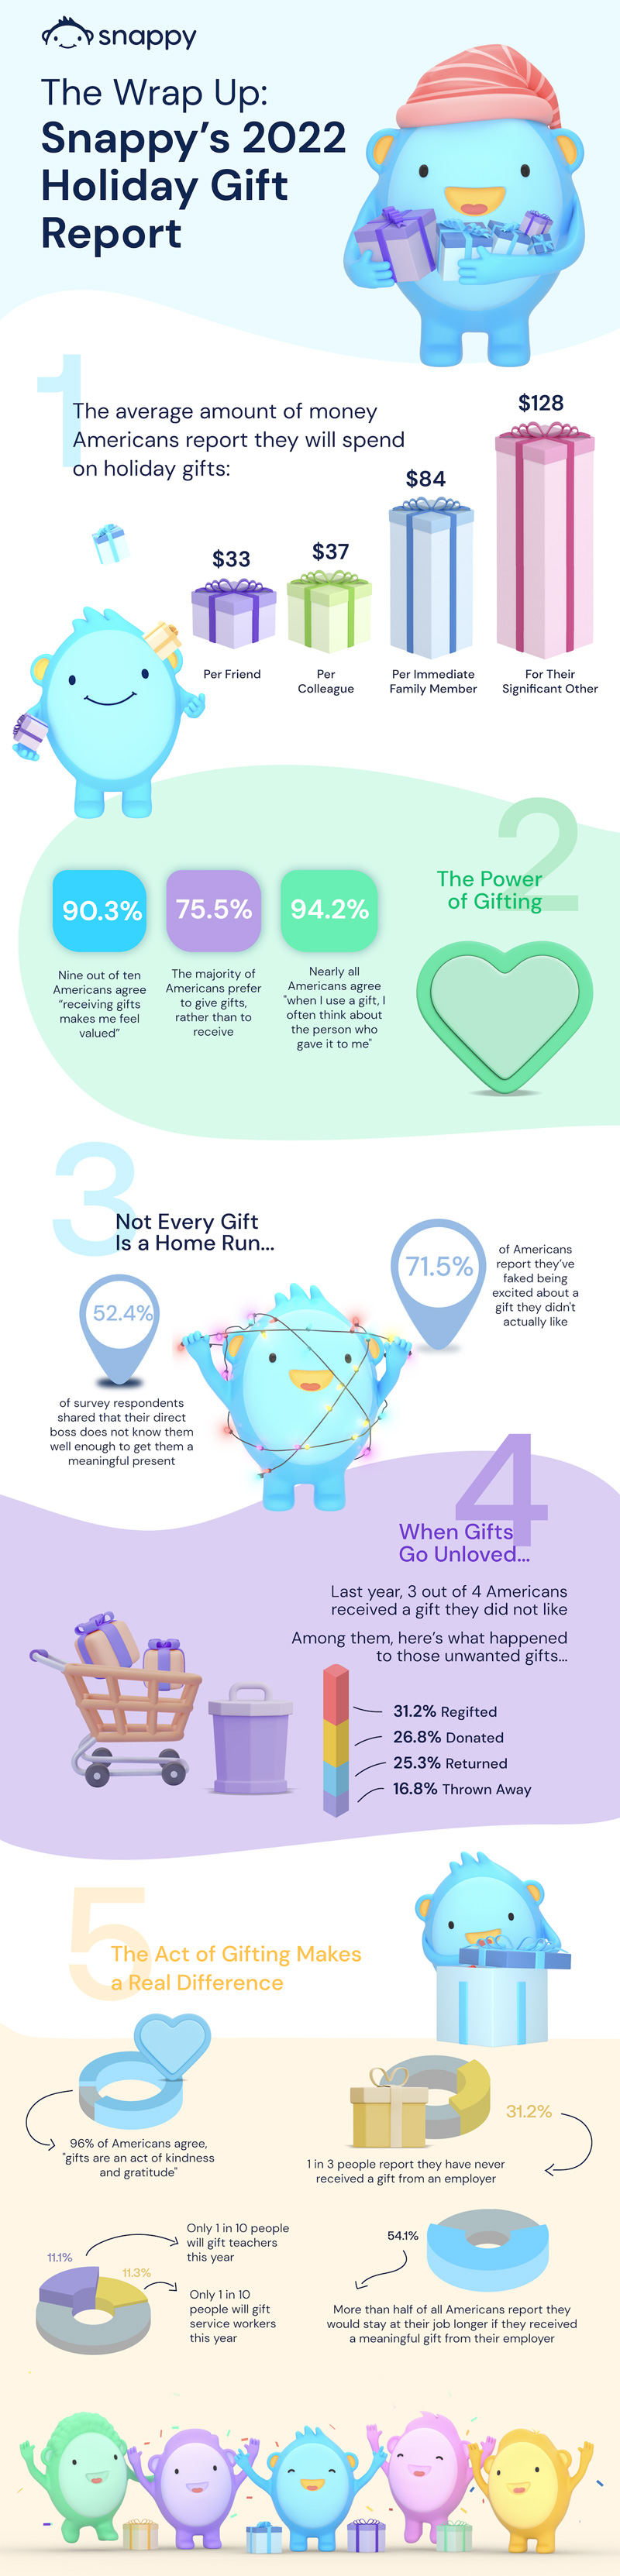 The Wrap Up: Snappy's 2022 Holiday Gift Report #infographic #best infographics #infographic s